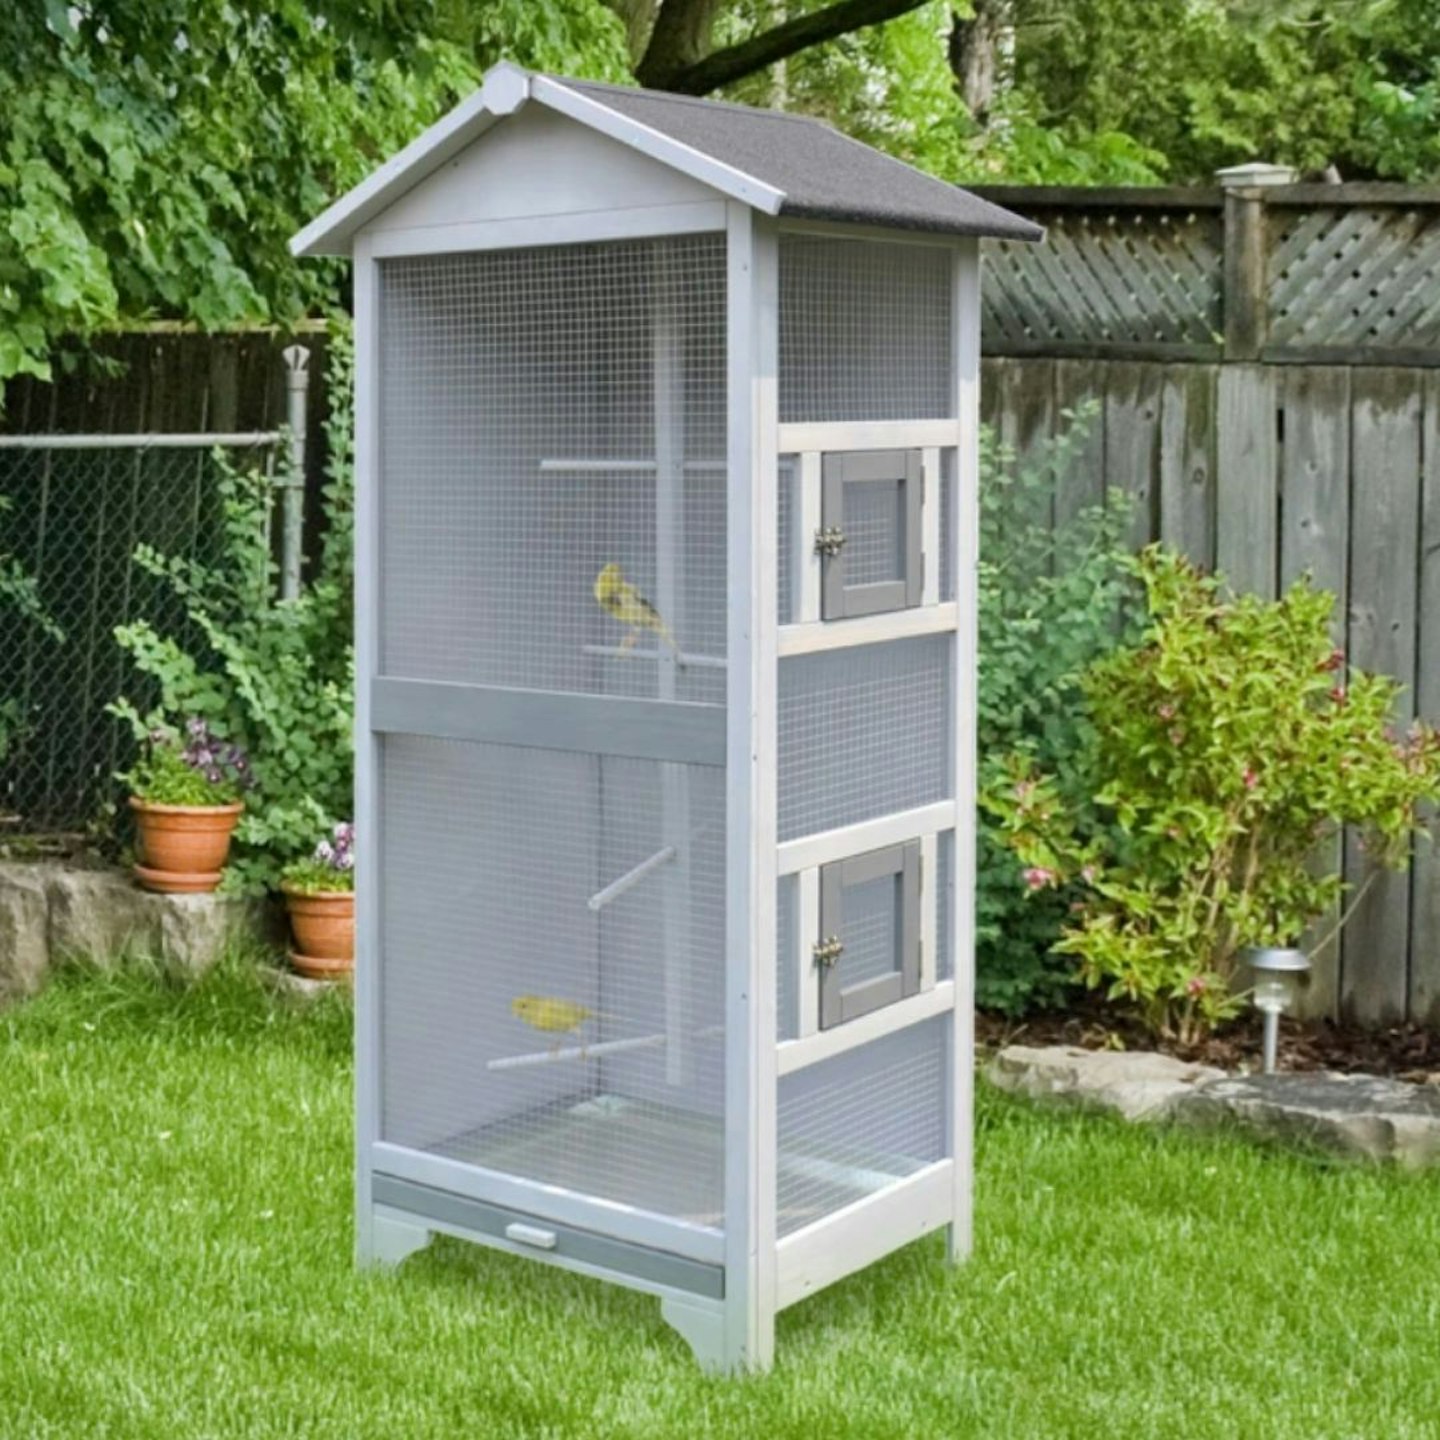 PawHut Wooden Outdoor Bird Cage Large Play House